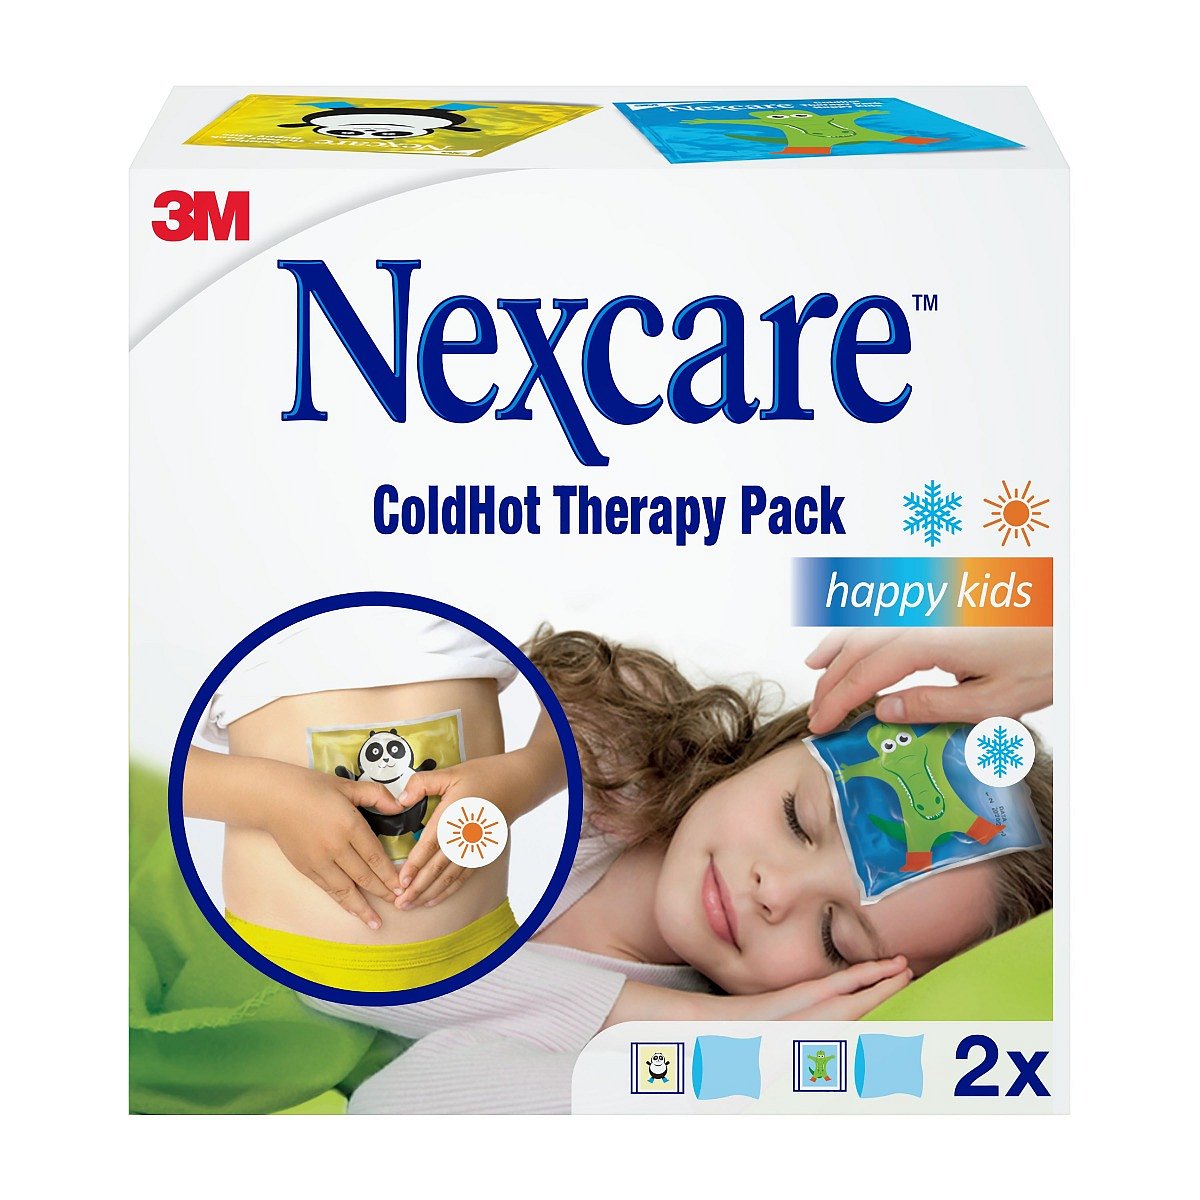 3M Nexcare ColdHot Therapy Pack Happy Kids 2 ks